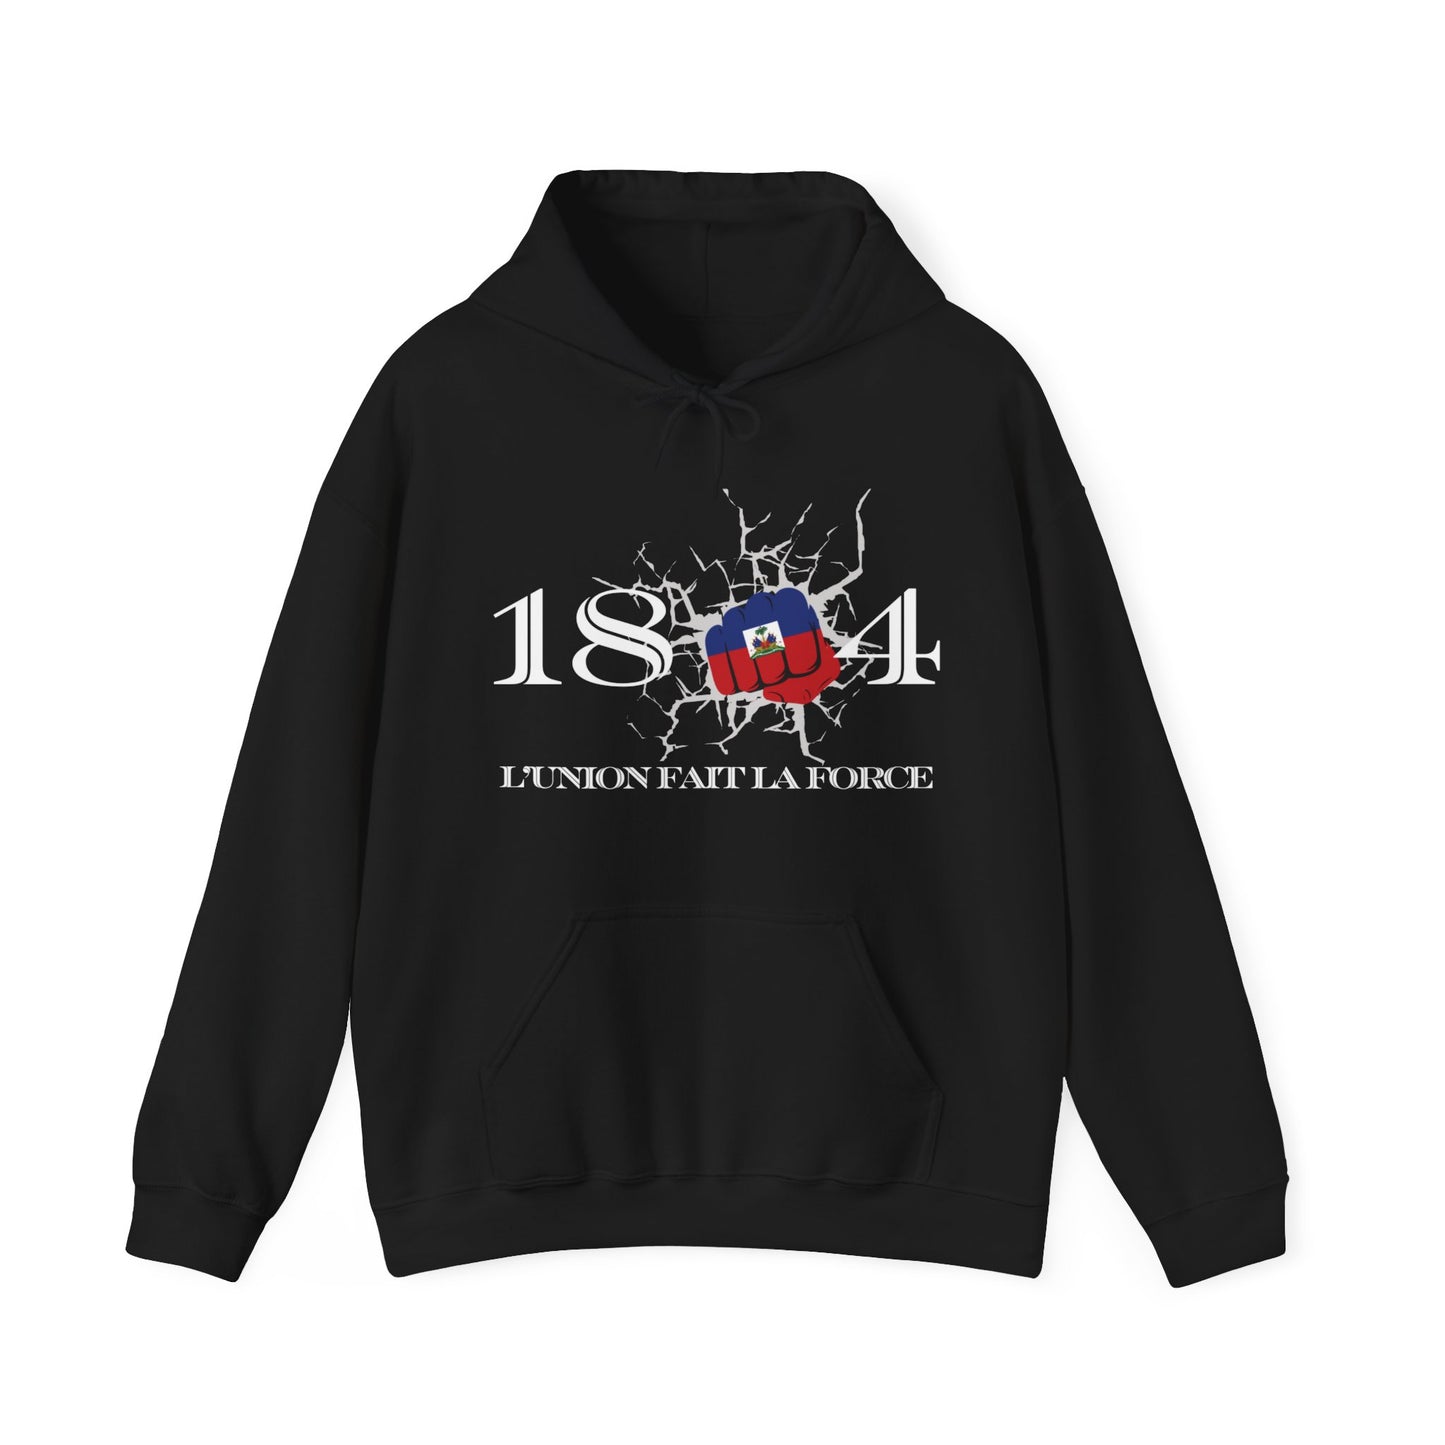 1804 Strong - Hoodie